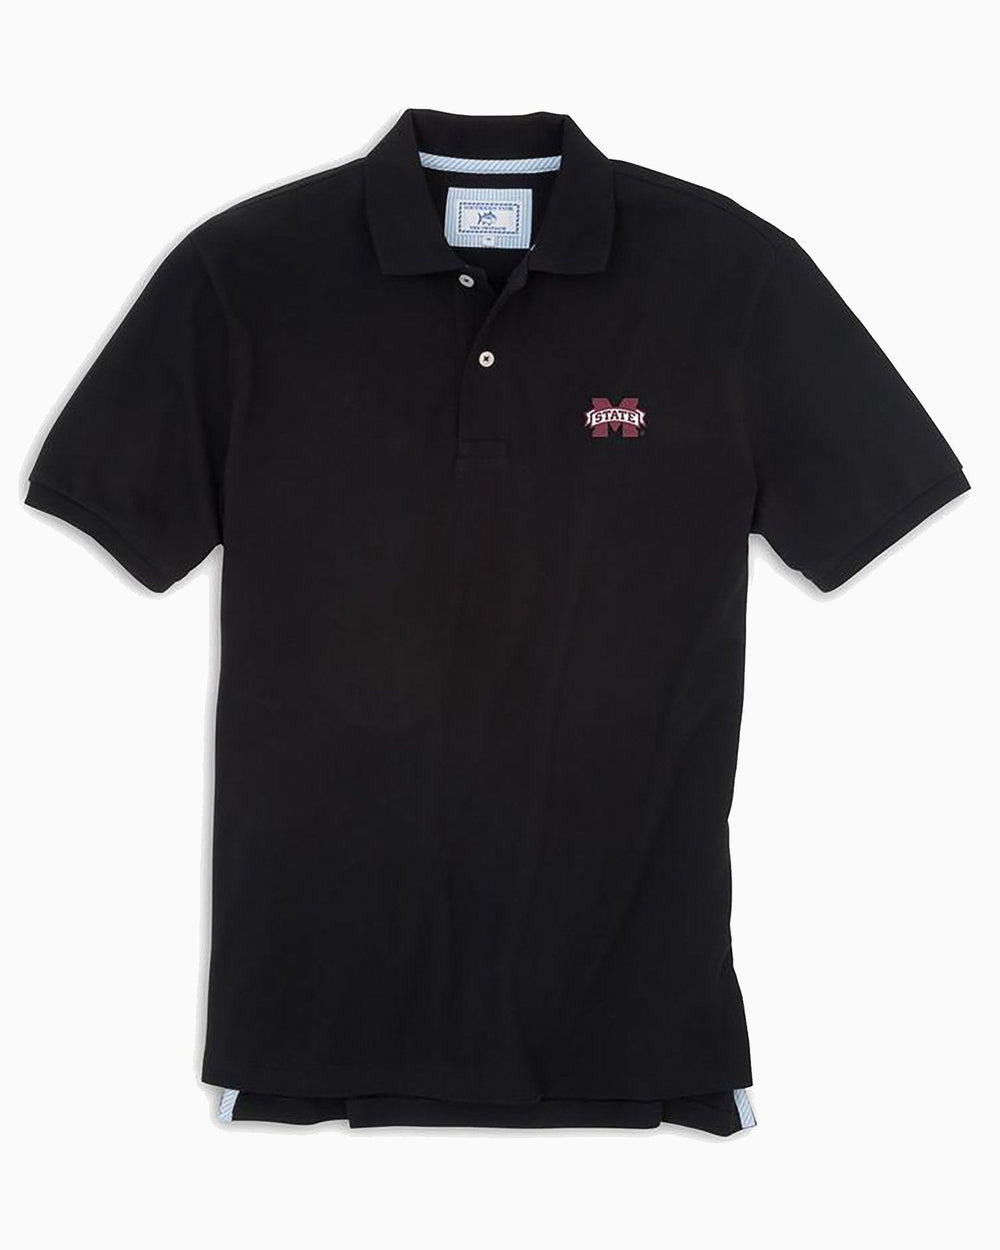 The front view of the Men's Black Mississippi State Pique Polo Shirt by Southern Tide - Black